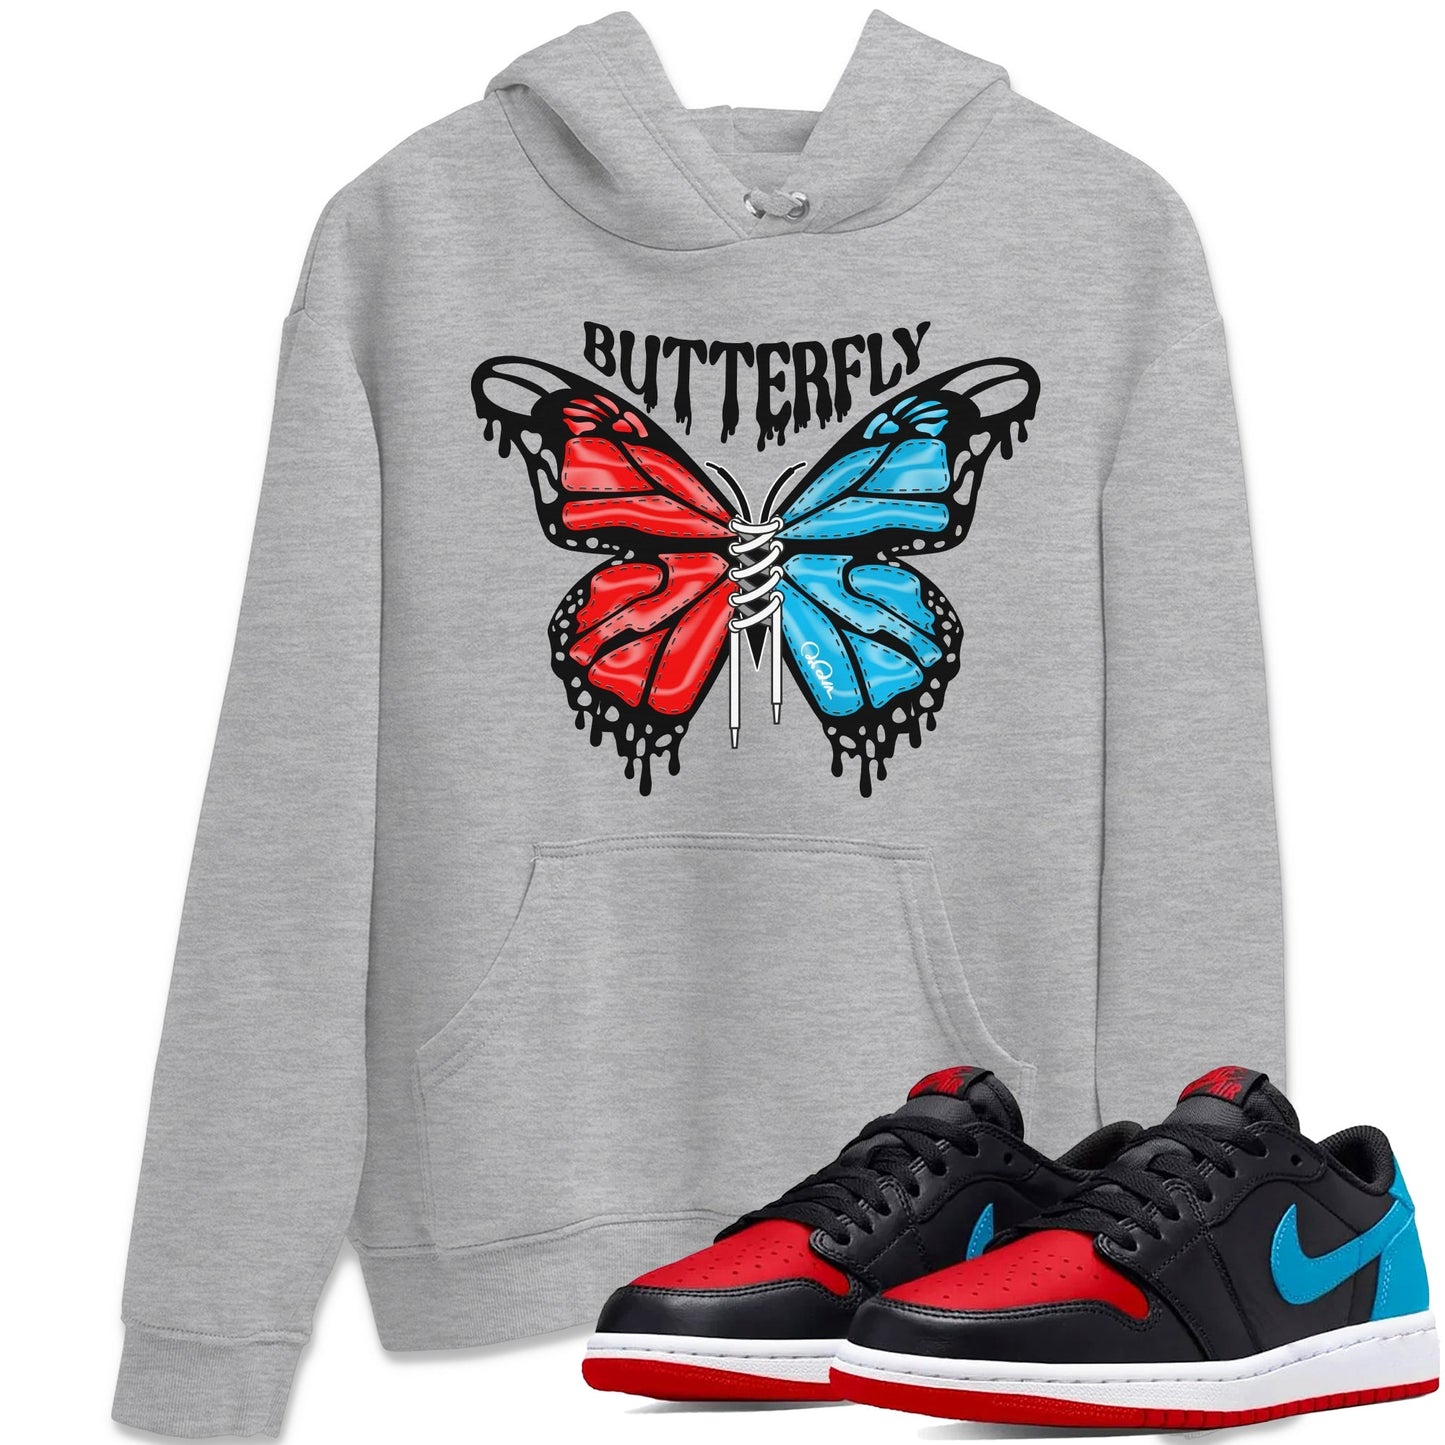 Air Jordan 1 UNC to Chicago Sneaker Match Tees Butterfly Streetwear Sneaker Shirt AJ1 UNC to Chicago Sneaker Release Tees Unisex Shirts Heather Grey 1